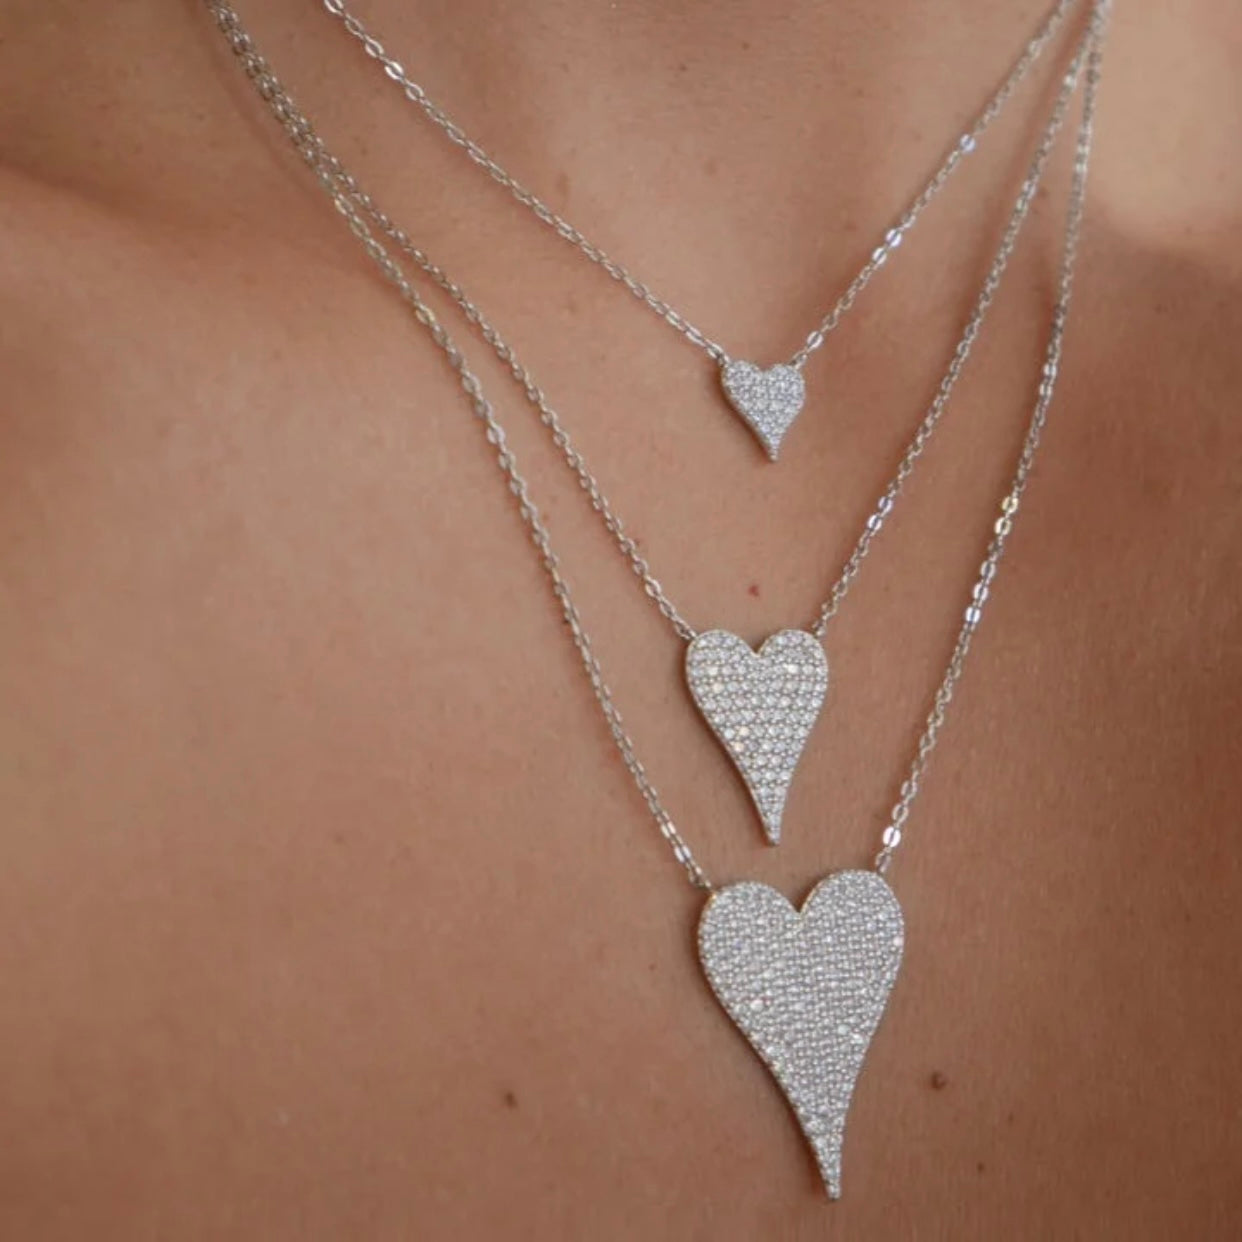 ADELLE STERLING SILVER PAVE HEART PENDENT NECKLACE